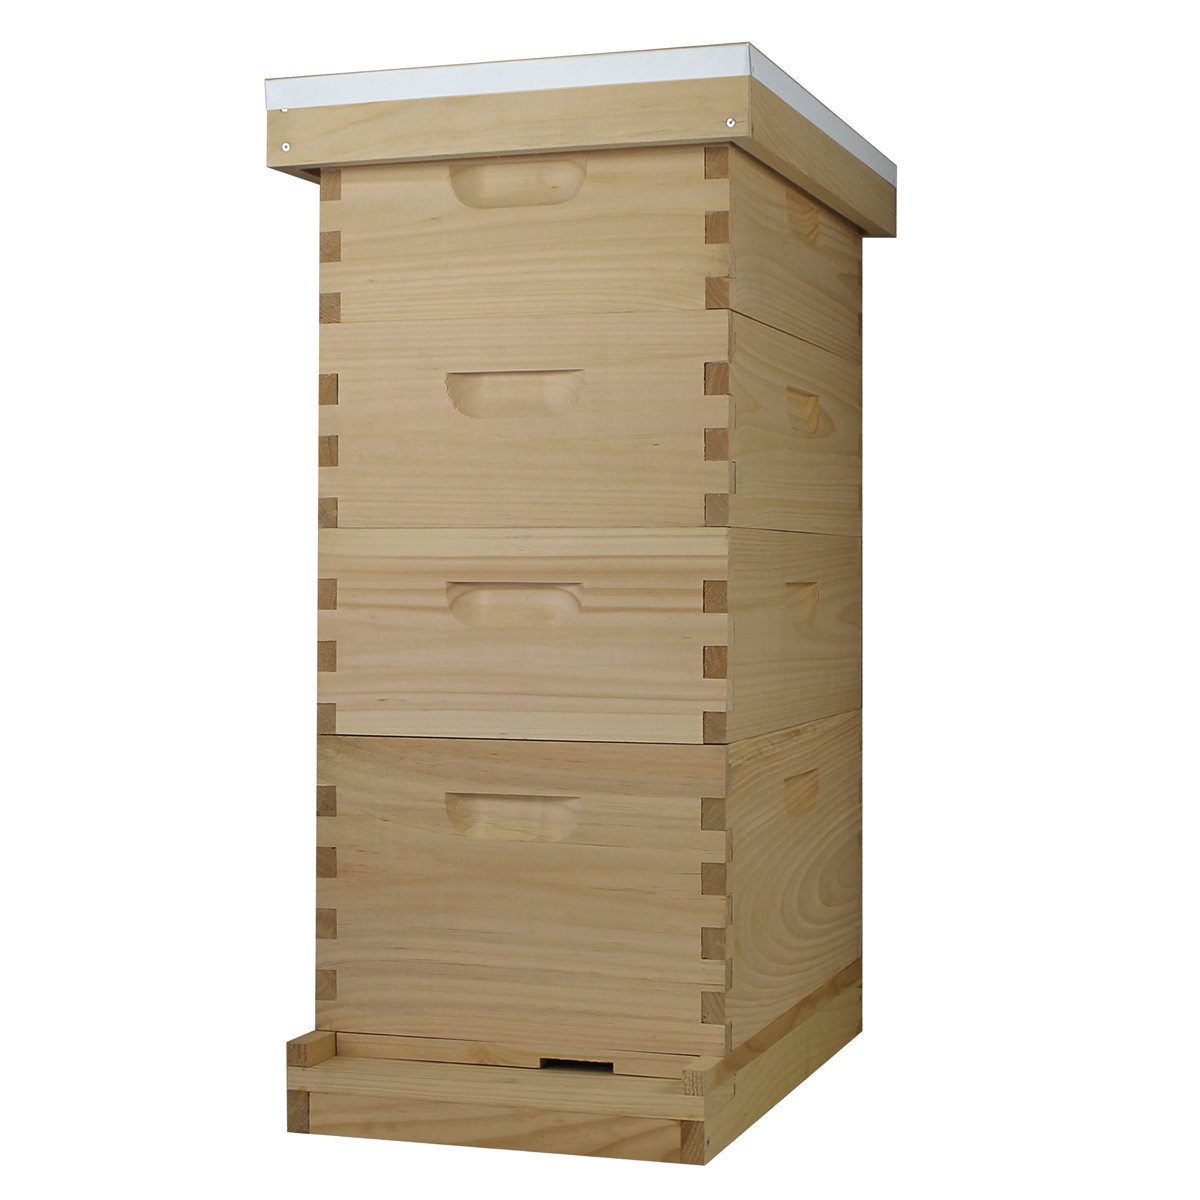 Busy Bees 'N' More Amish Made 8 Frame Beehive With 1 Deep Bee Box & 3 Medium Bee Boxes